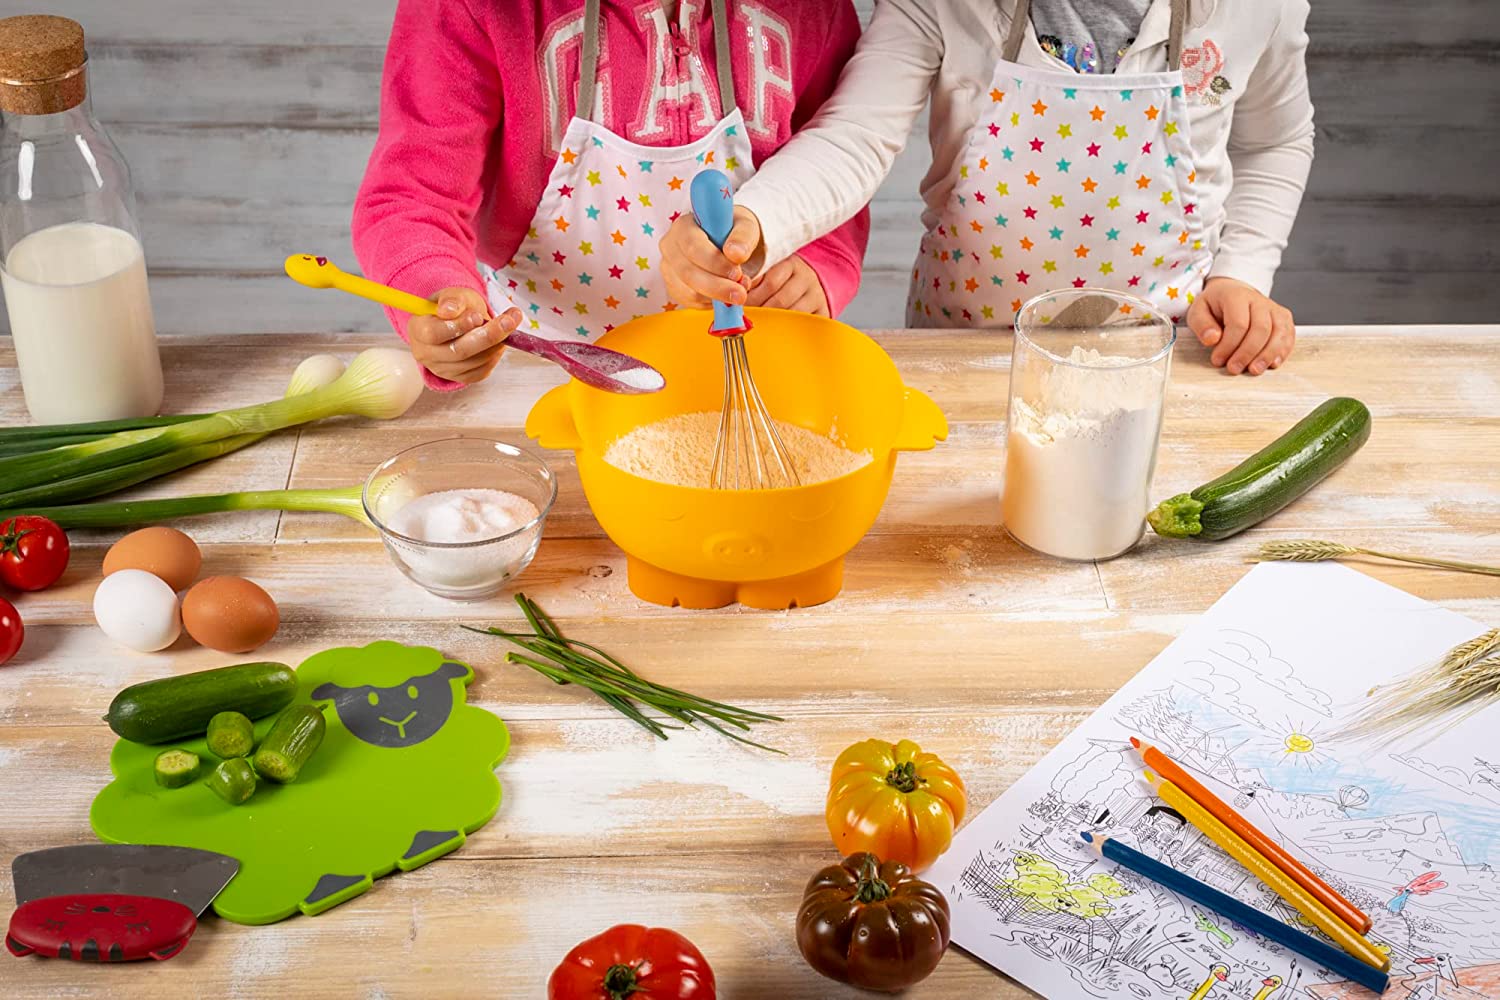 2 children whisking and spooning ingredients onto a bowl on a table with veggies, papers, and colored pencils on it.